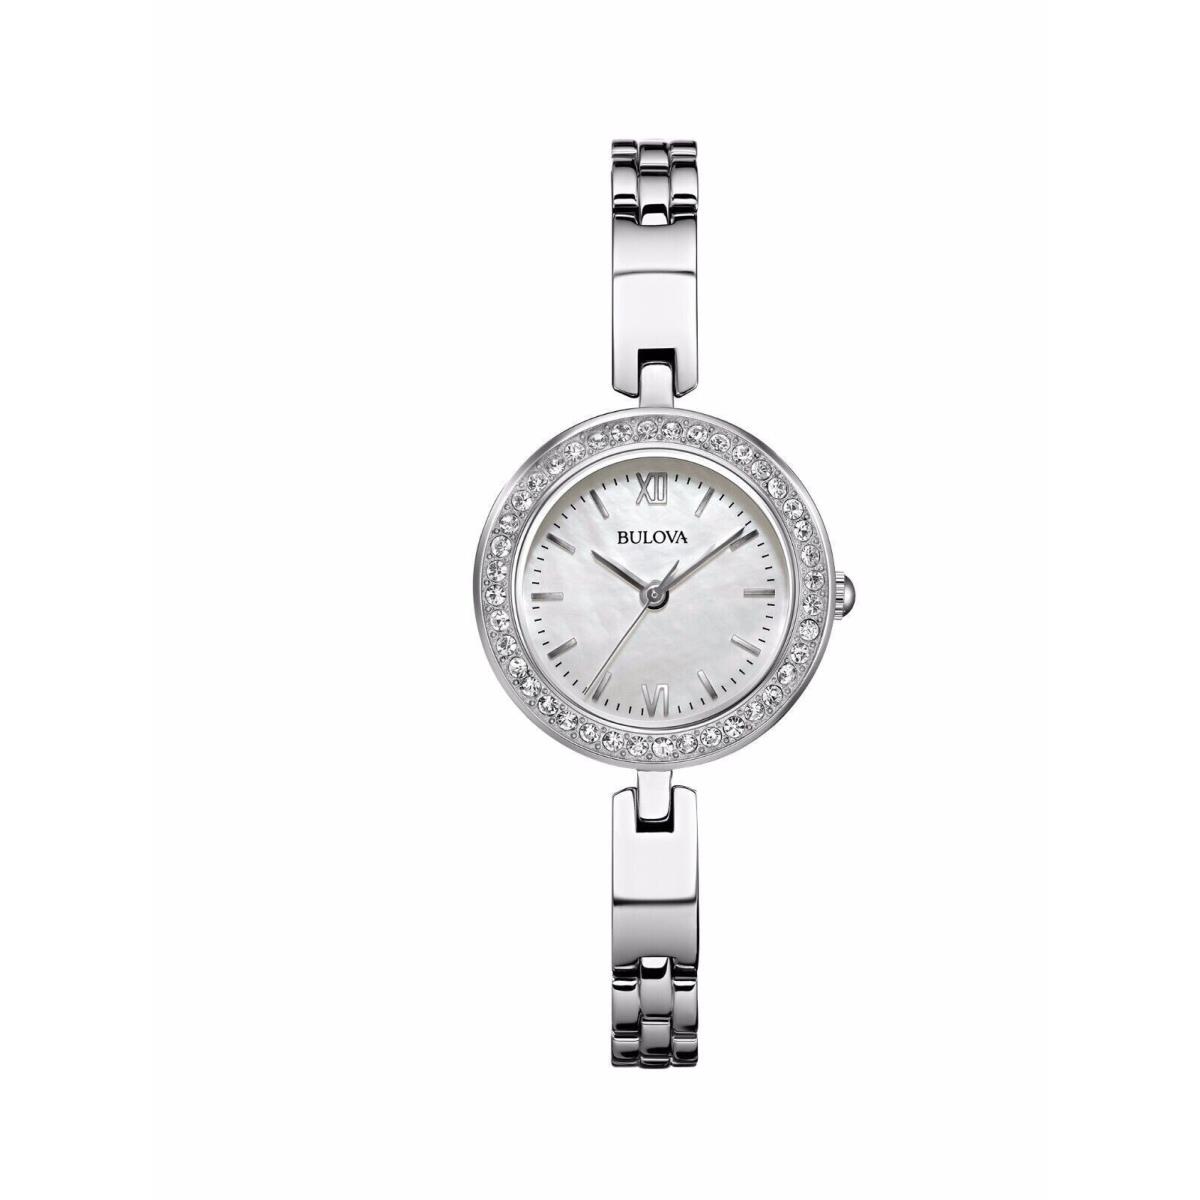 Bulova 98X107 Crystal Accented Mother of Pearl Dial Silver Tone Watch - Dial: , Band: Silver, Bezel: Silver